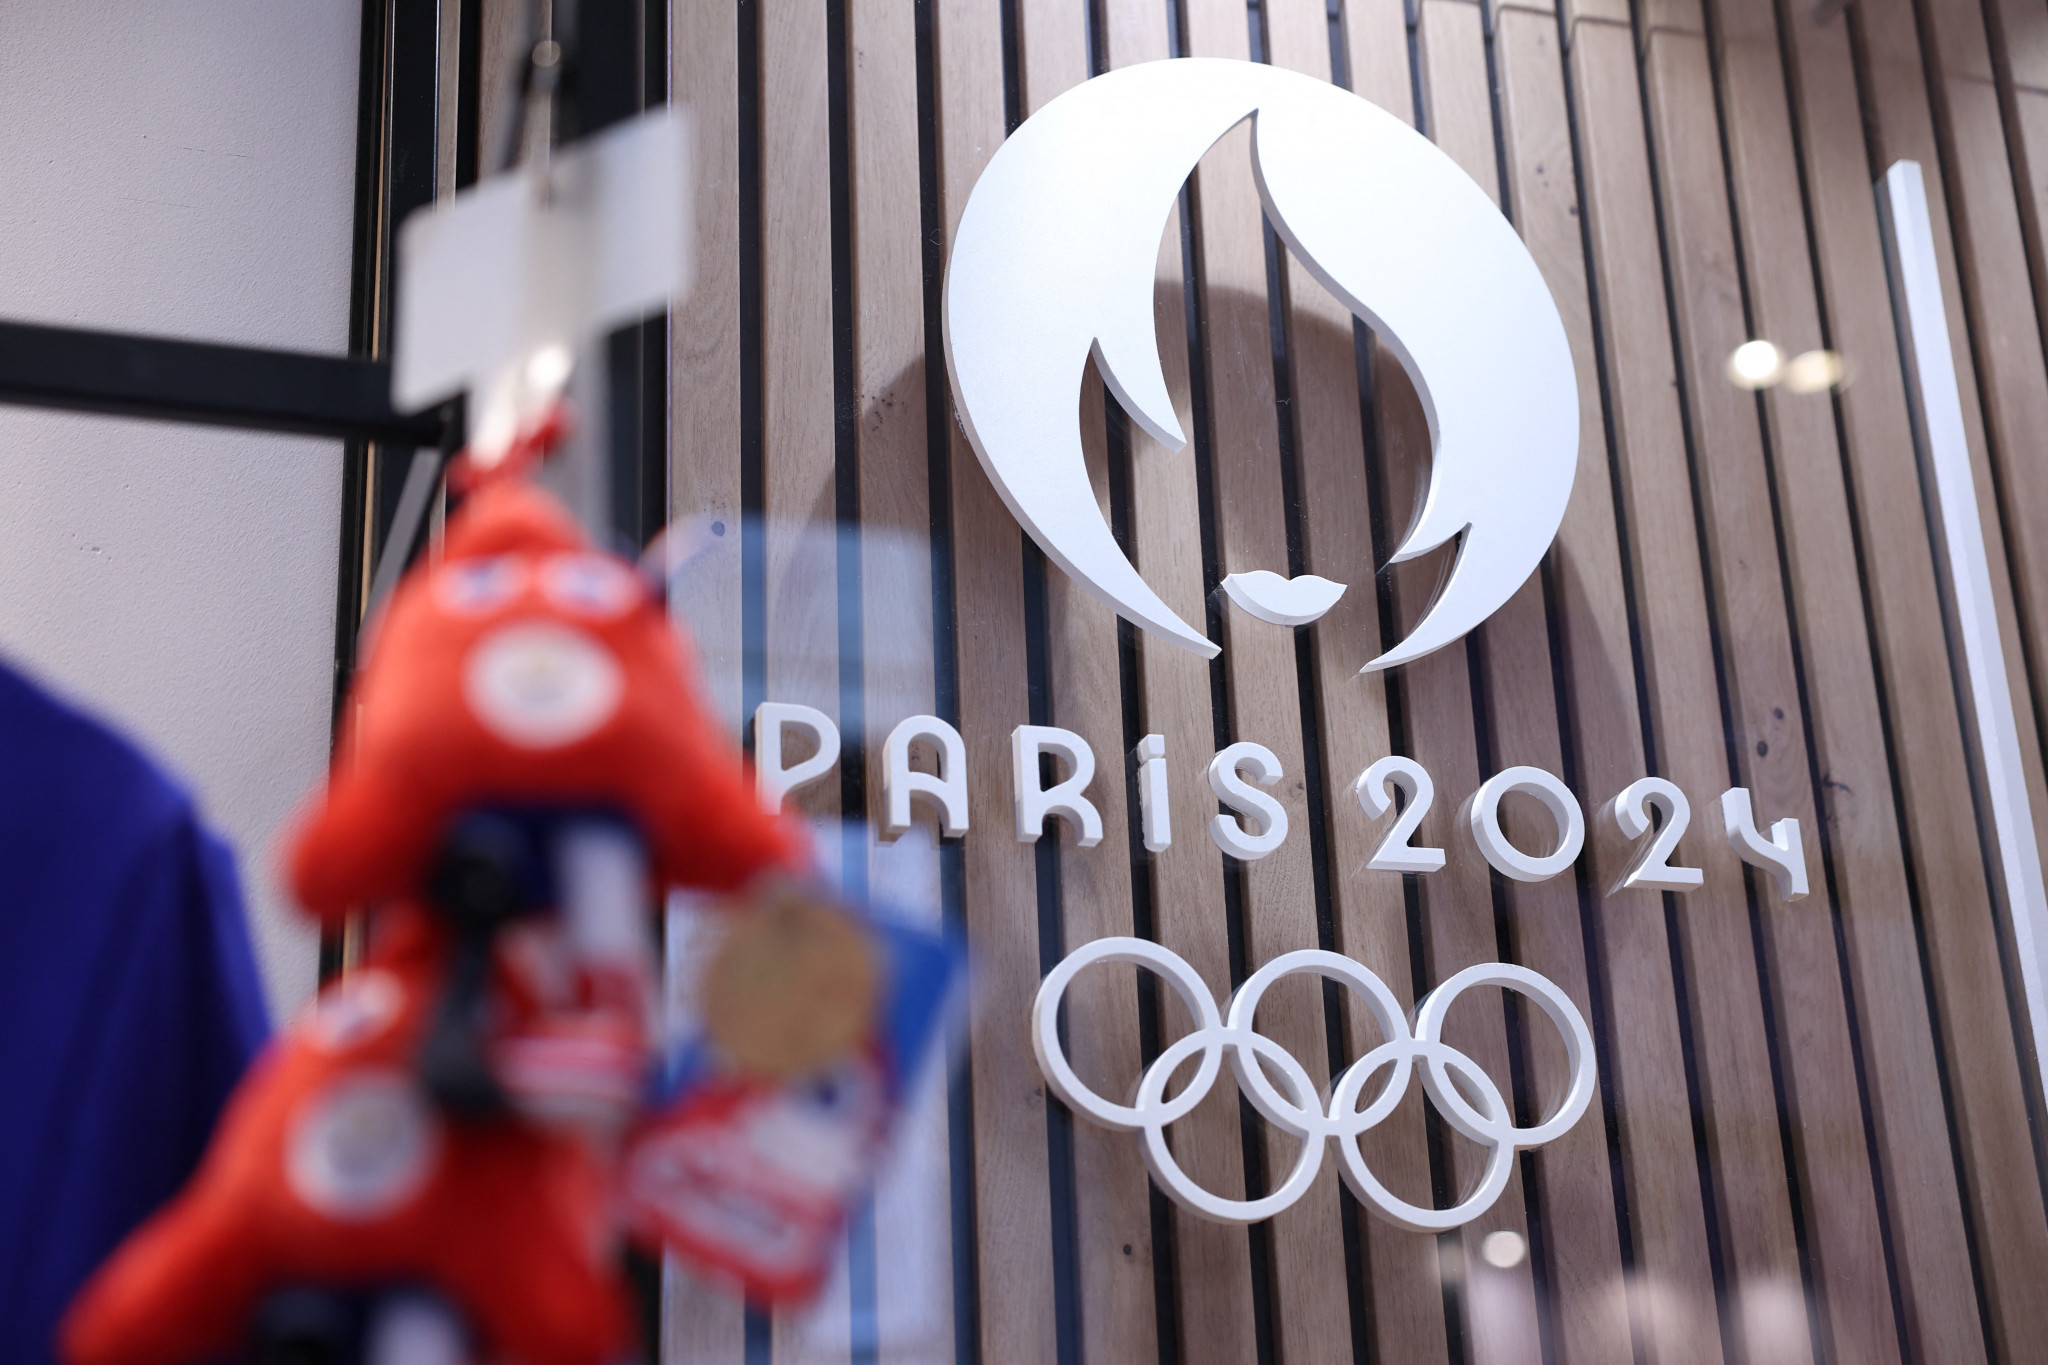 Paris 2024 is seeking 45,000 volunteers for the Olympics and Paralympics ©Getty Images